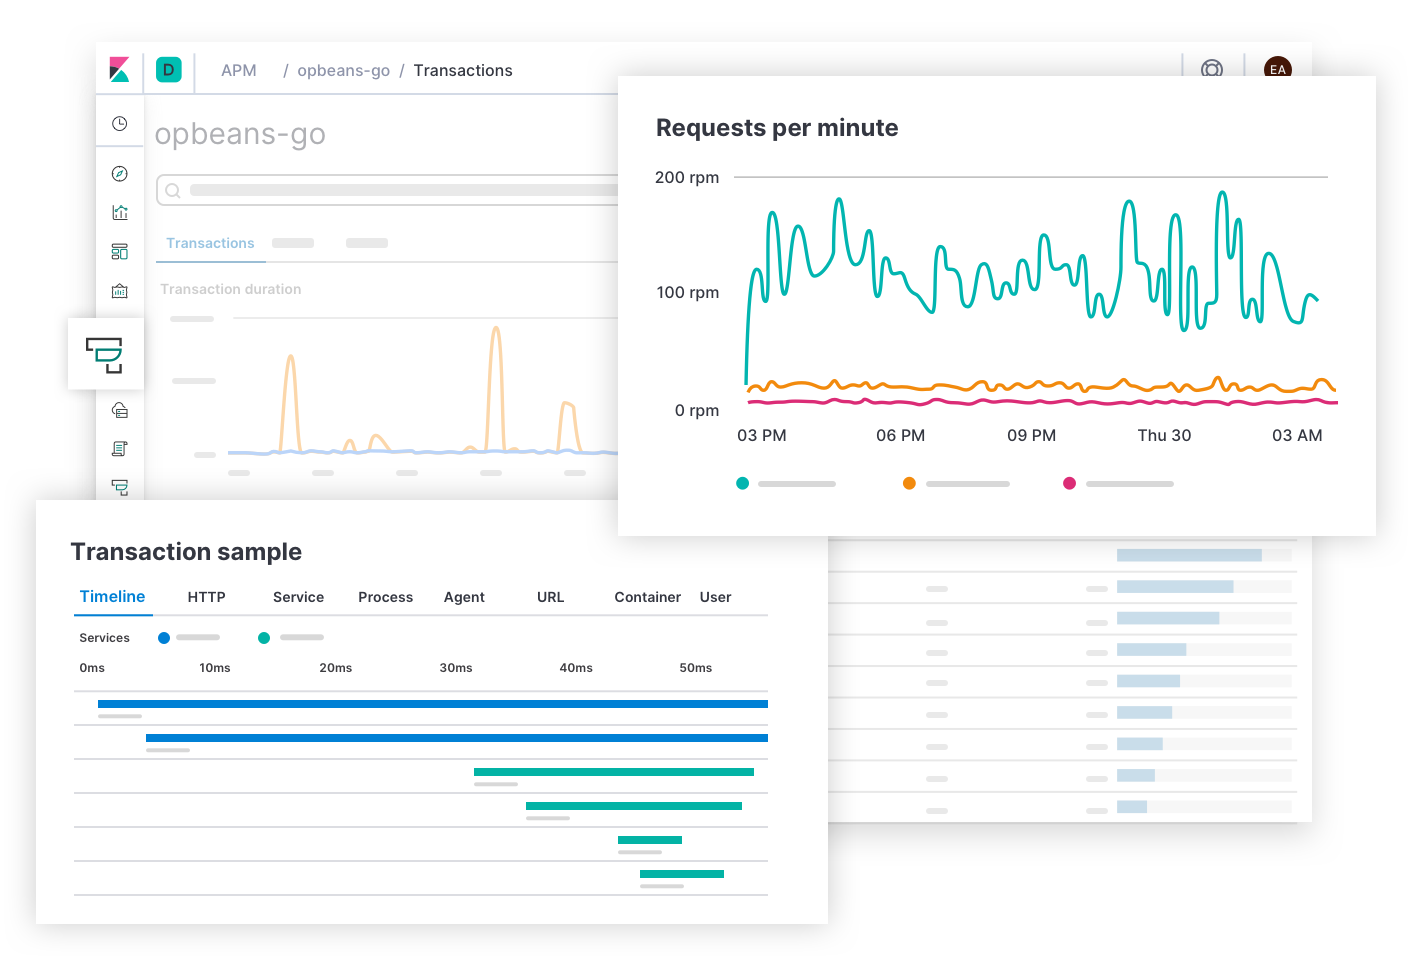 DE: Application Performance Monitoring charts and graphs